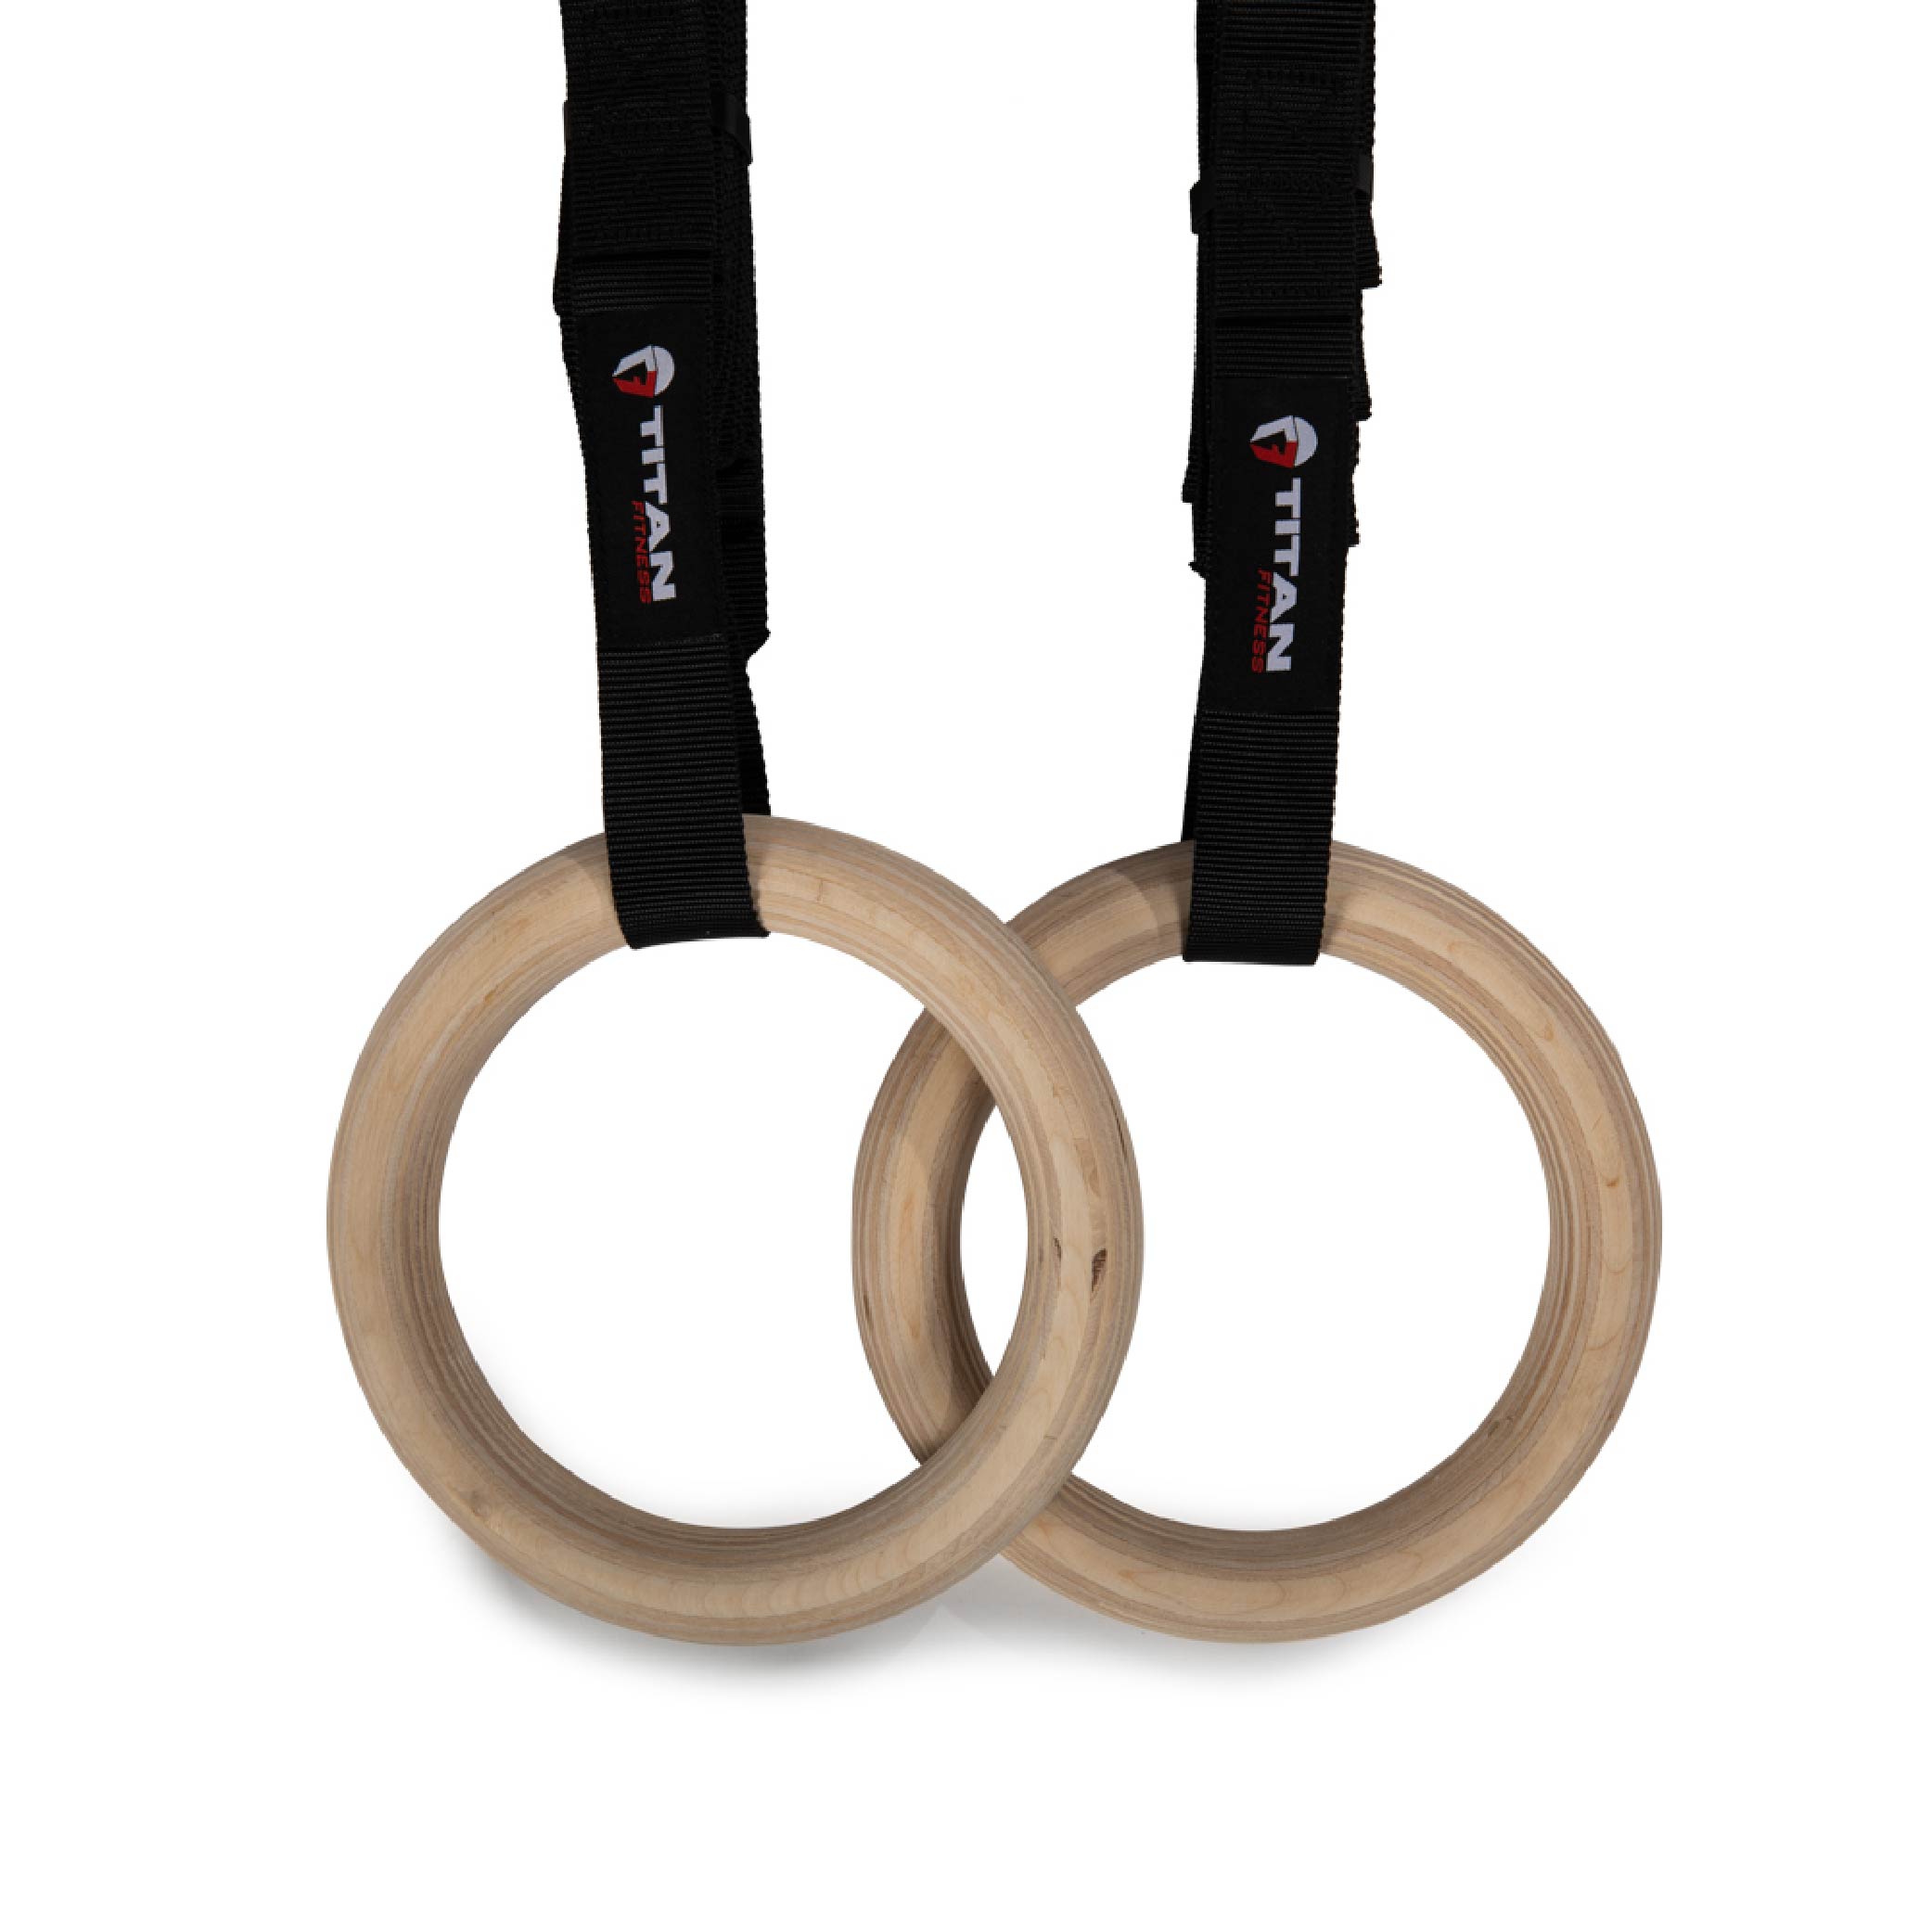 Oxideren vandaag verraad 28mm Wood Olympic Gymnastic Rings - 1.5 in W Heavy Duty Thick Straps &  Buckle | Titan Fitness